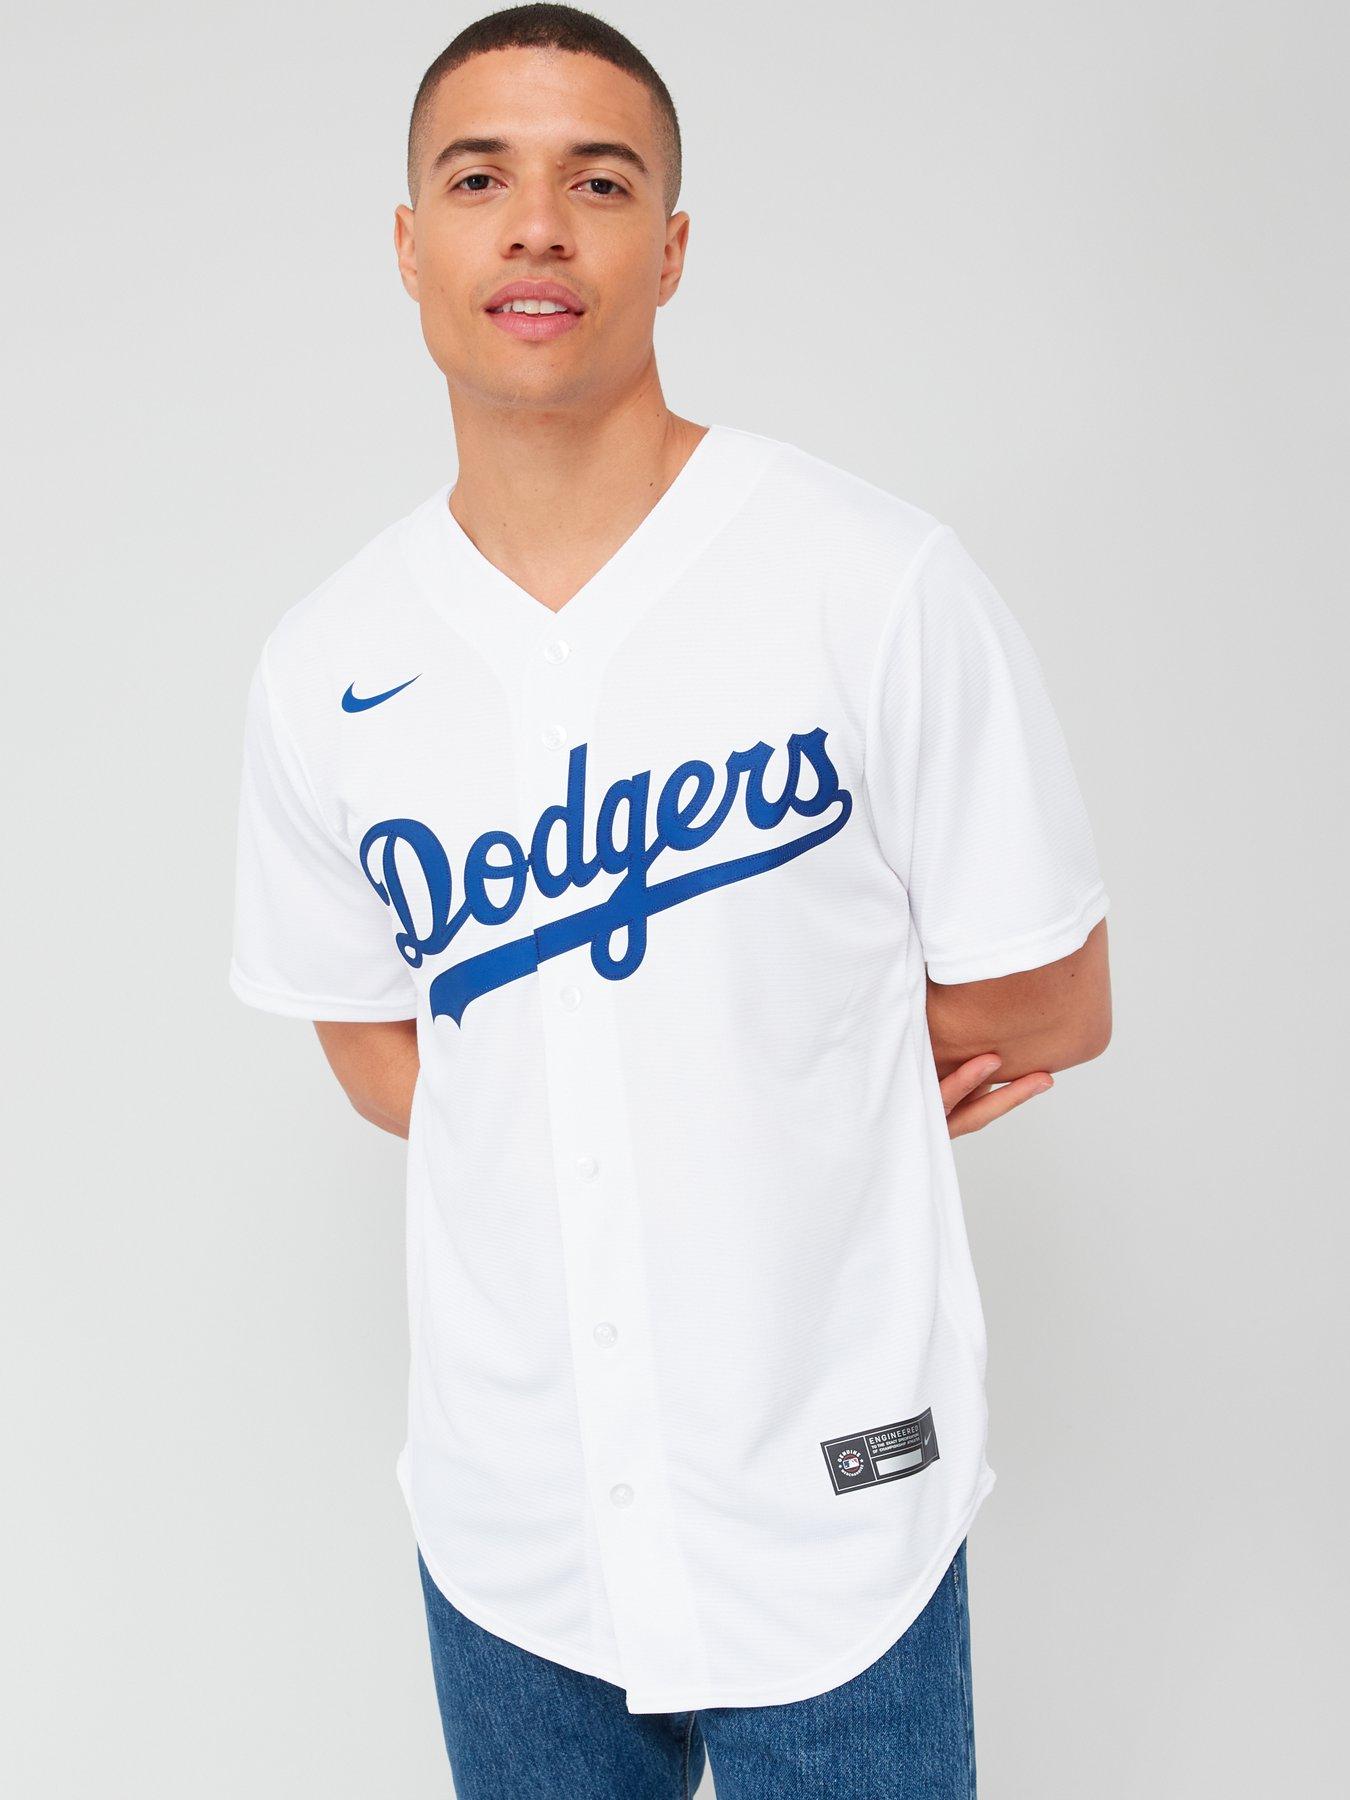 Men's Los Angeles Dodgers Nike Black/White Official Replica Jersey